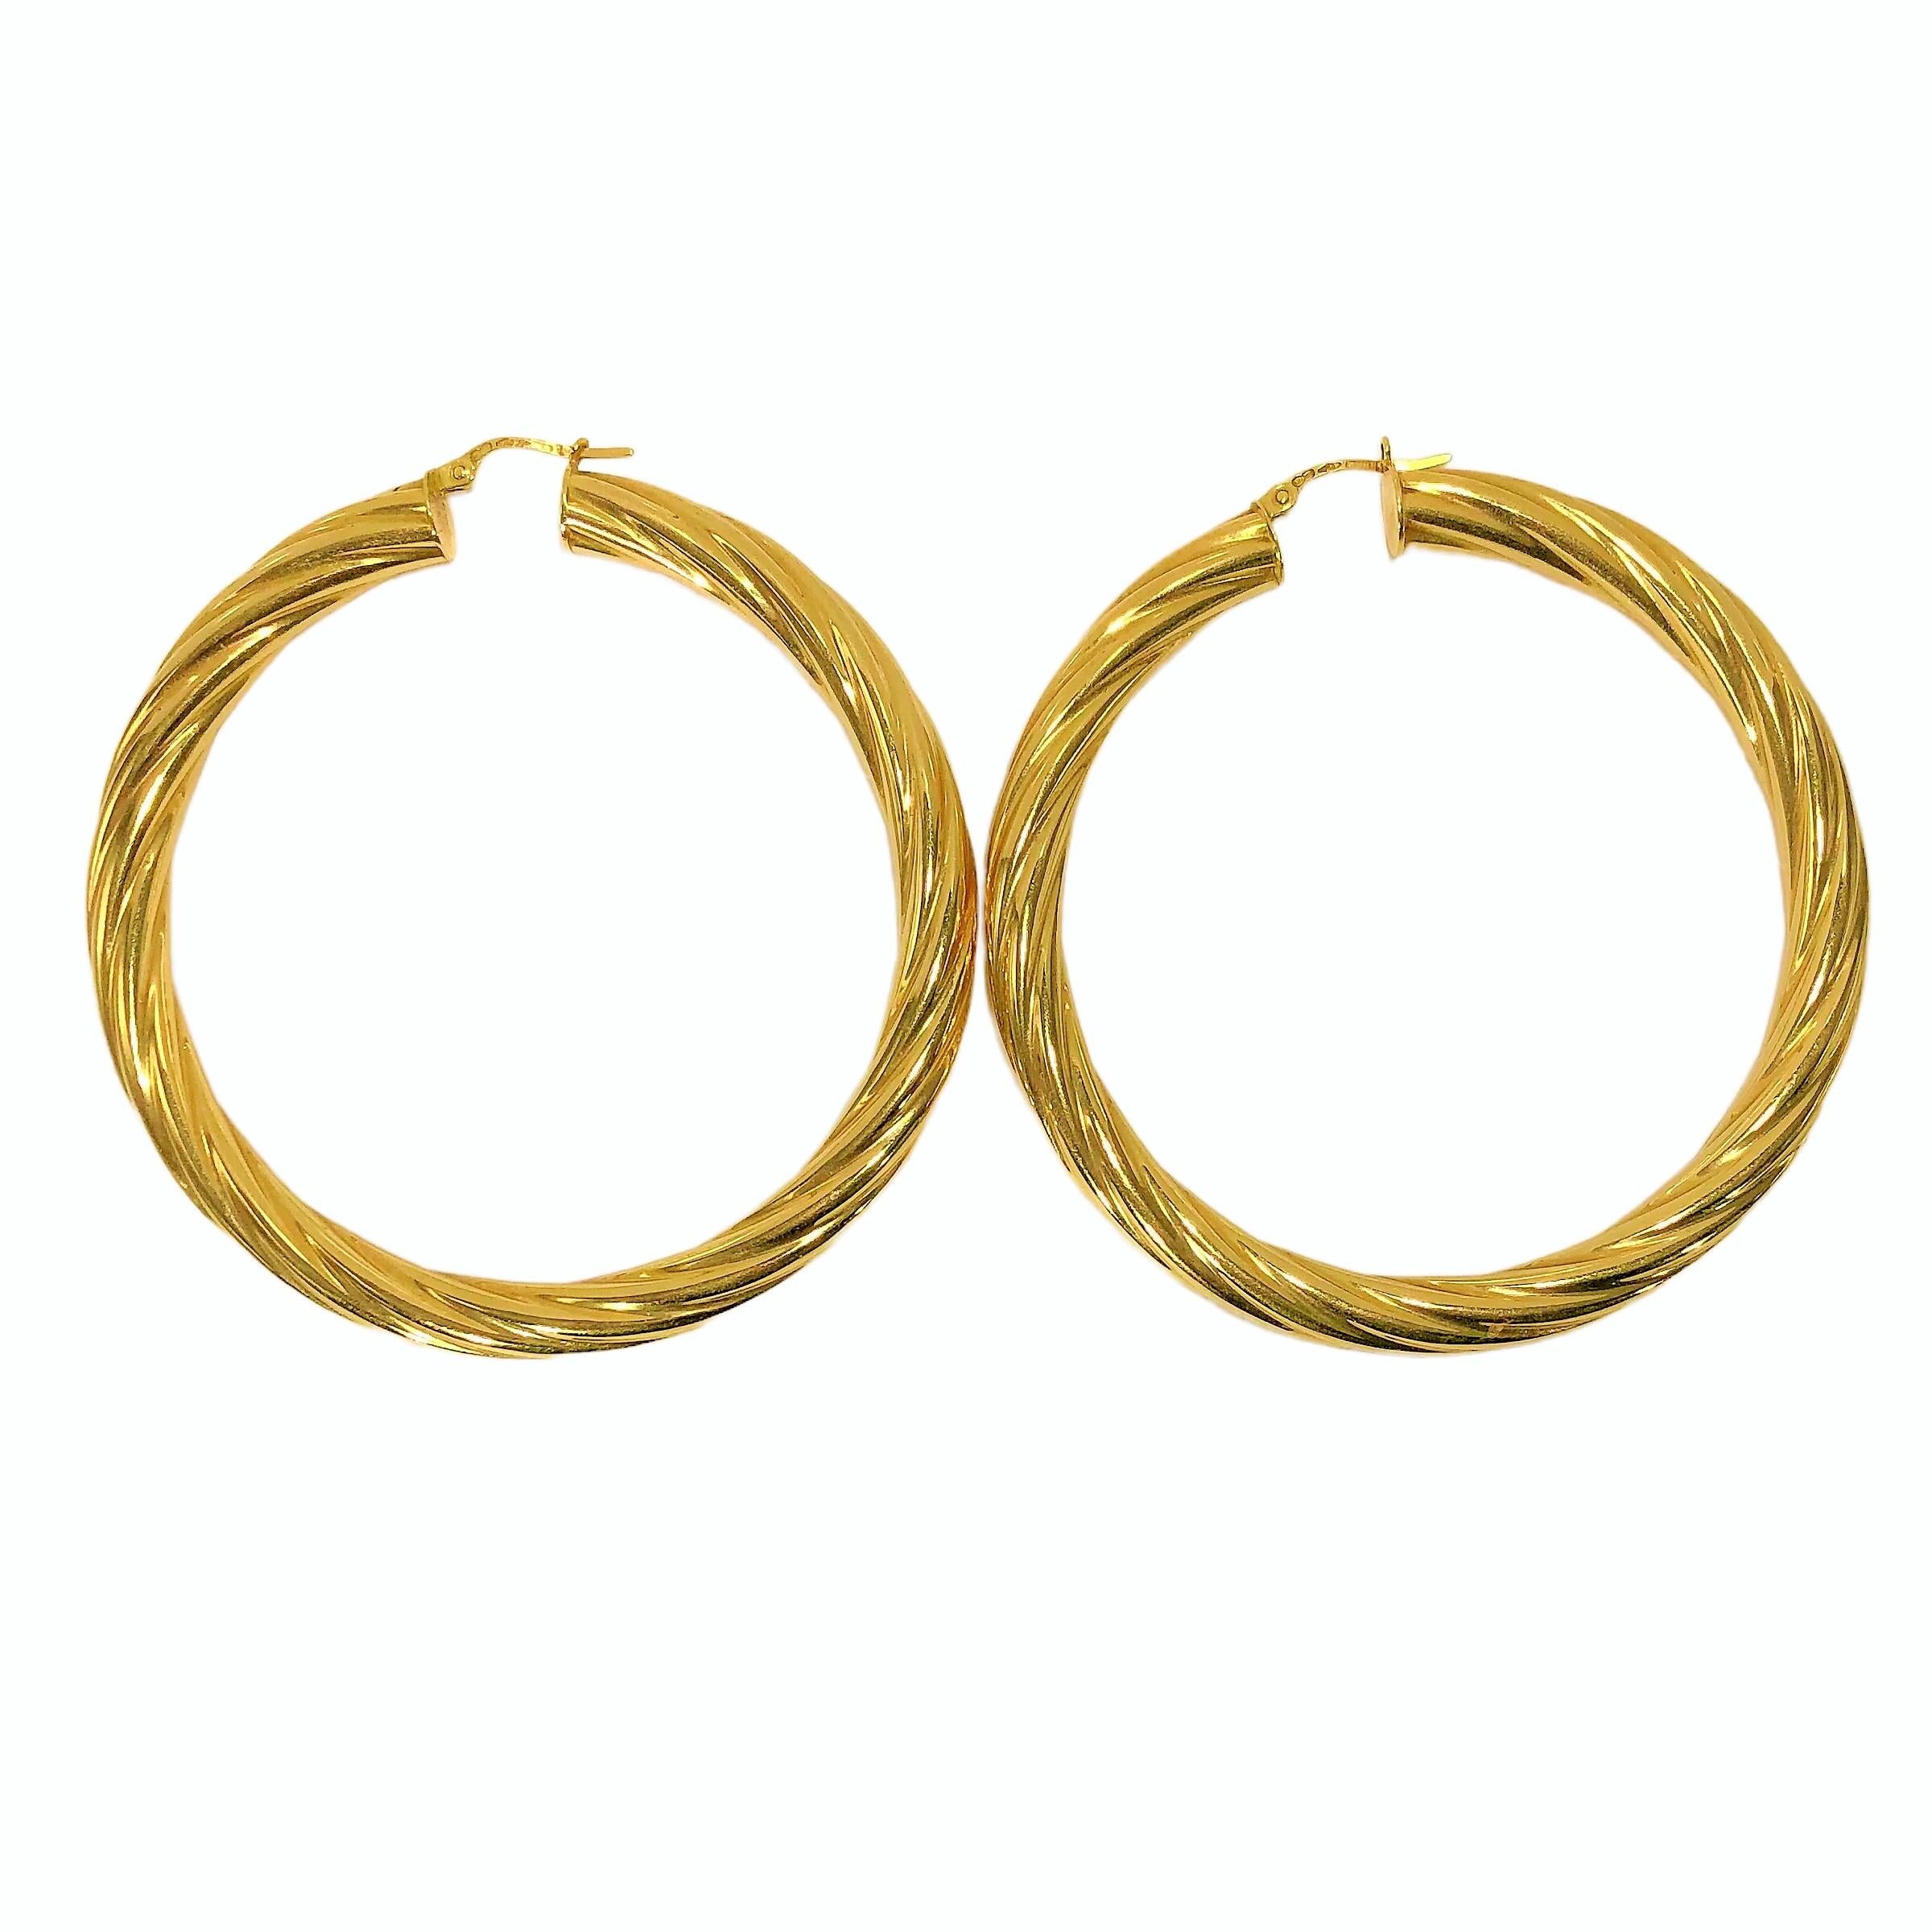 This large and very well made pair of 18K yellow gold Italian twisted and fluted tubular hoop earrings by Unoerre measure a full 2 3/8 inches in outside diameter. With tube diameter of approximately 1/4 inch, this striking pair will not be missed by